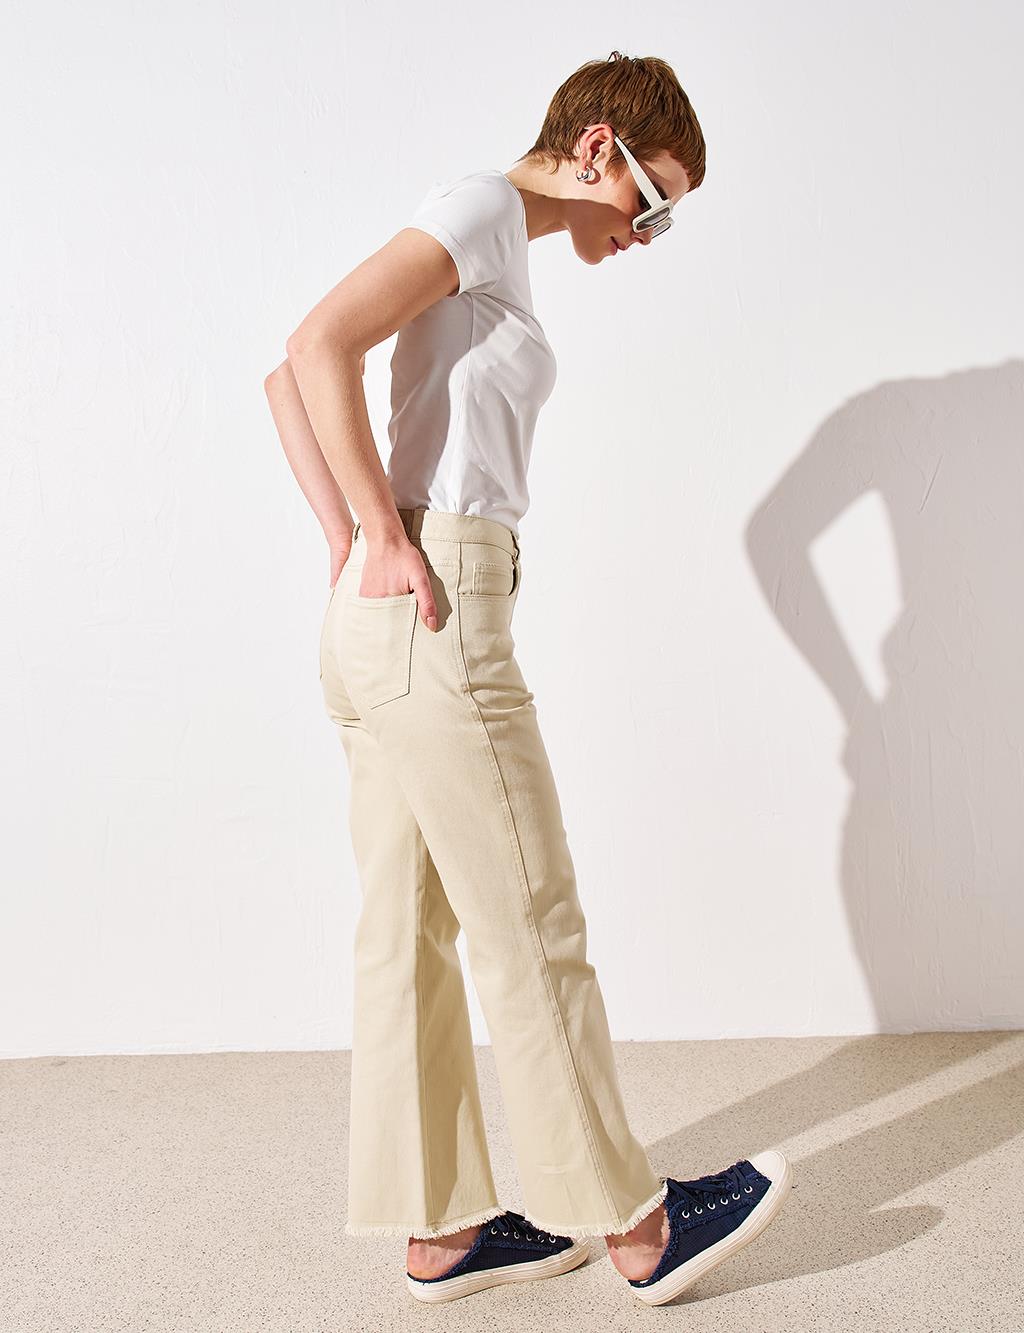 Embroidered Denim Trousers Cream with Tassels on the Leg